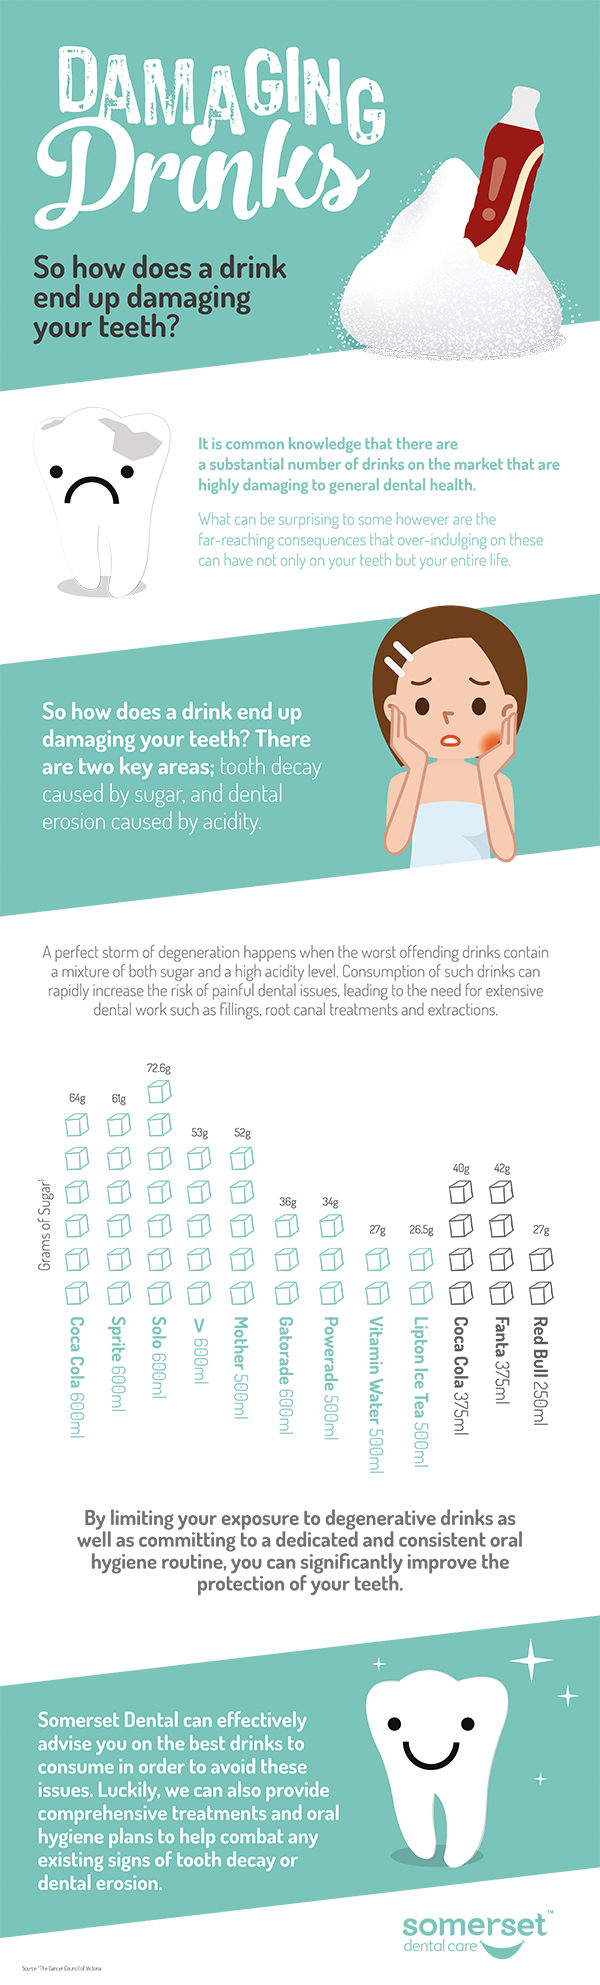 How does a drink damage your teeth?